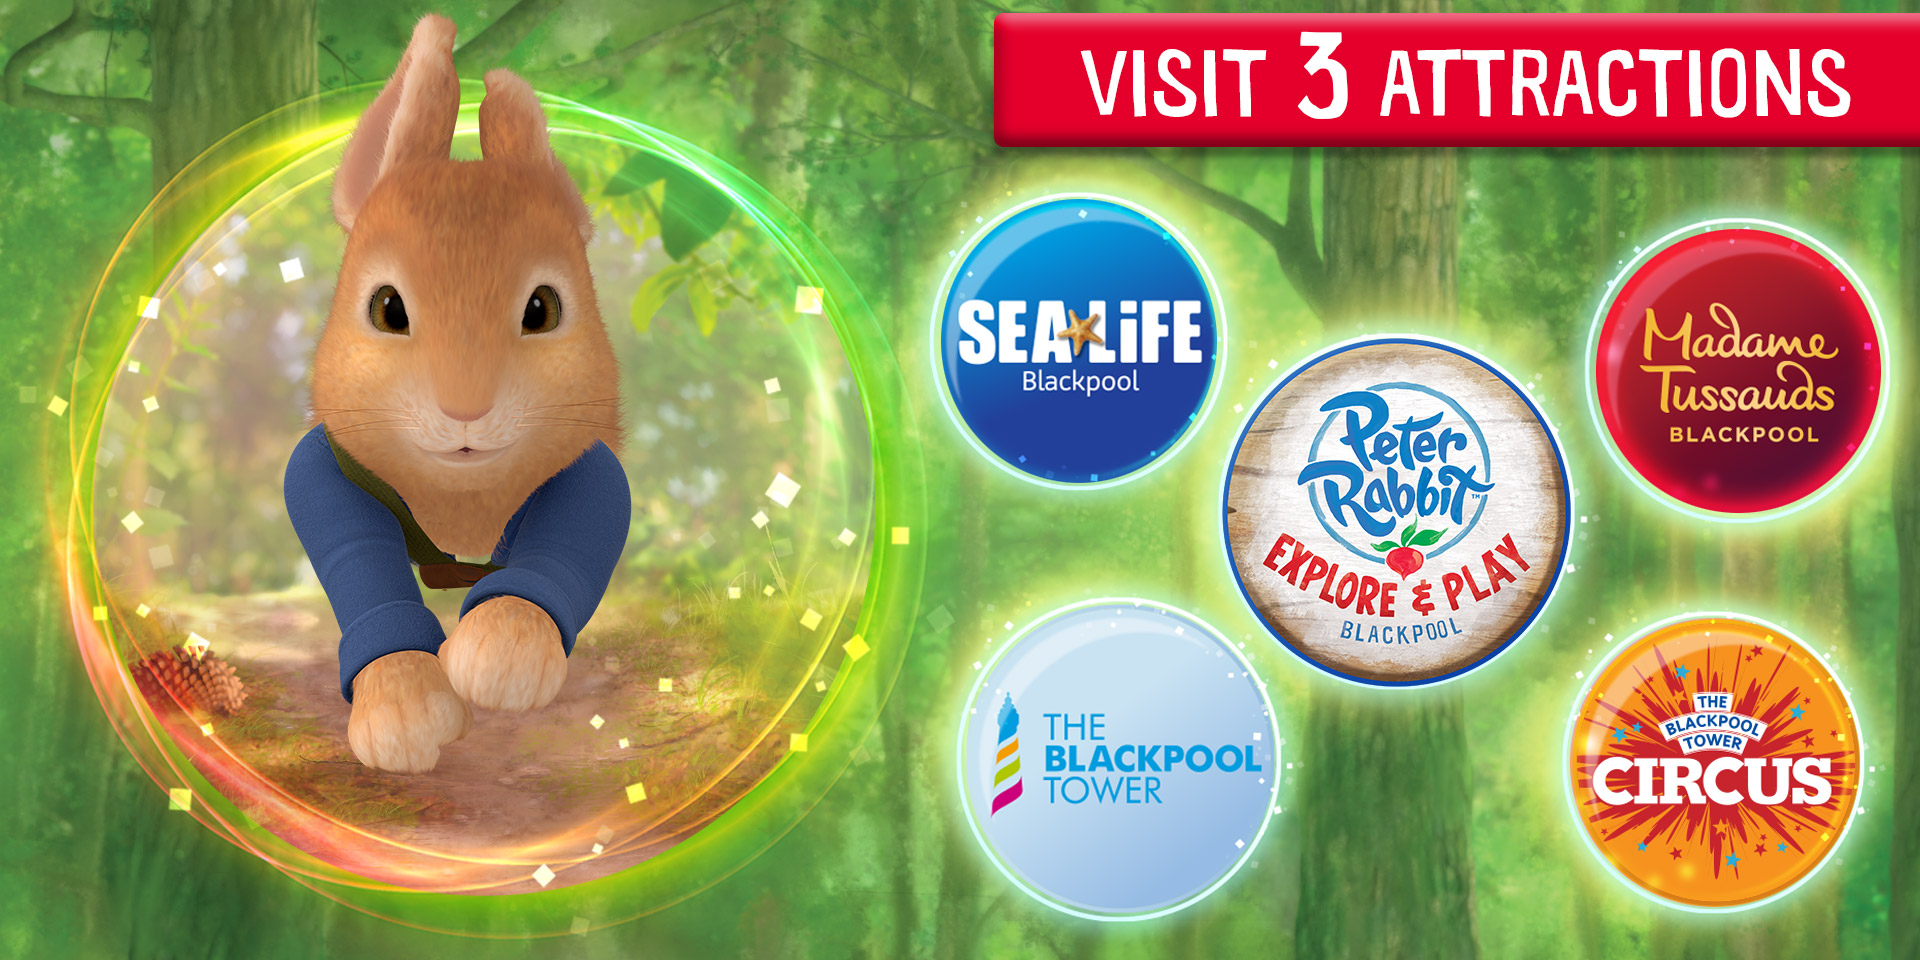 Peter Rabbit Explore and Play Blackpool plus three Blackpool Attractions